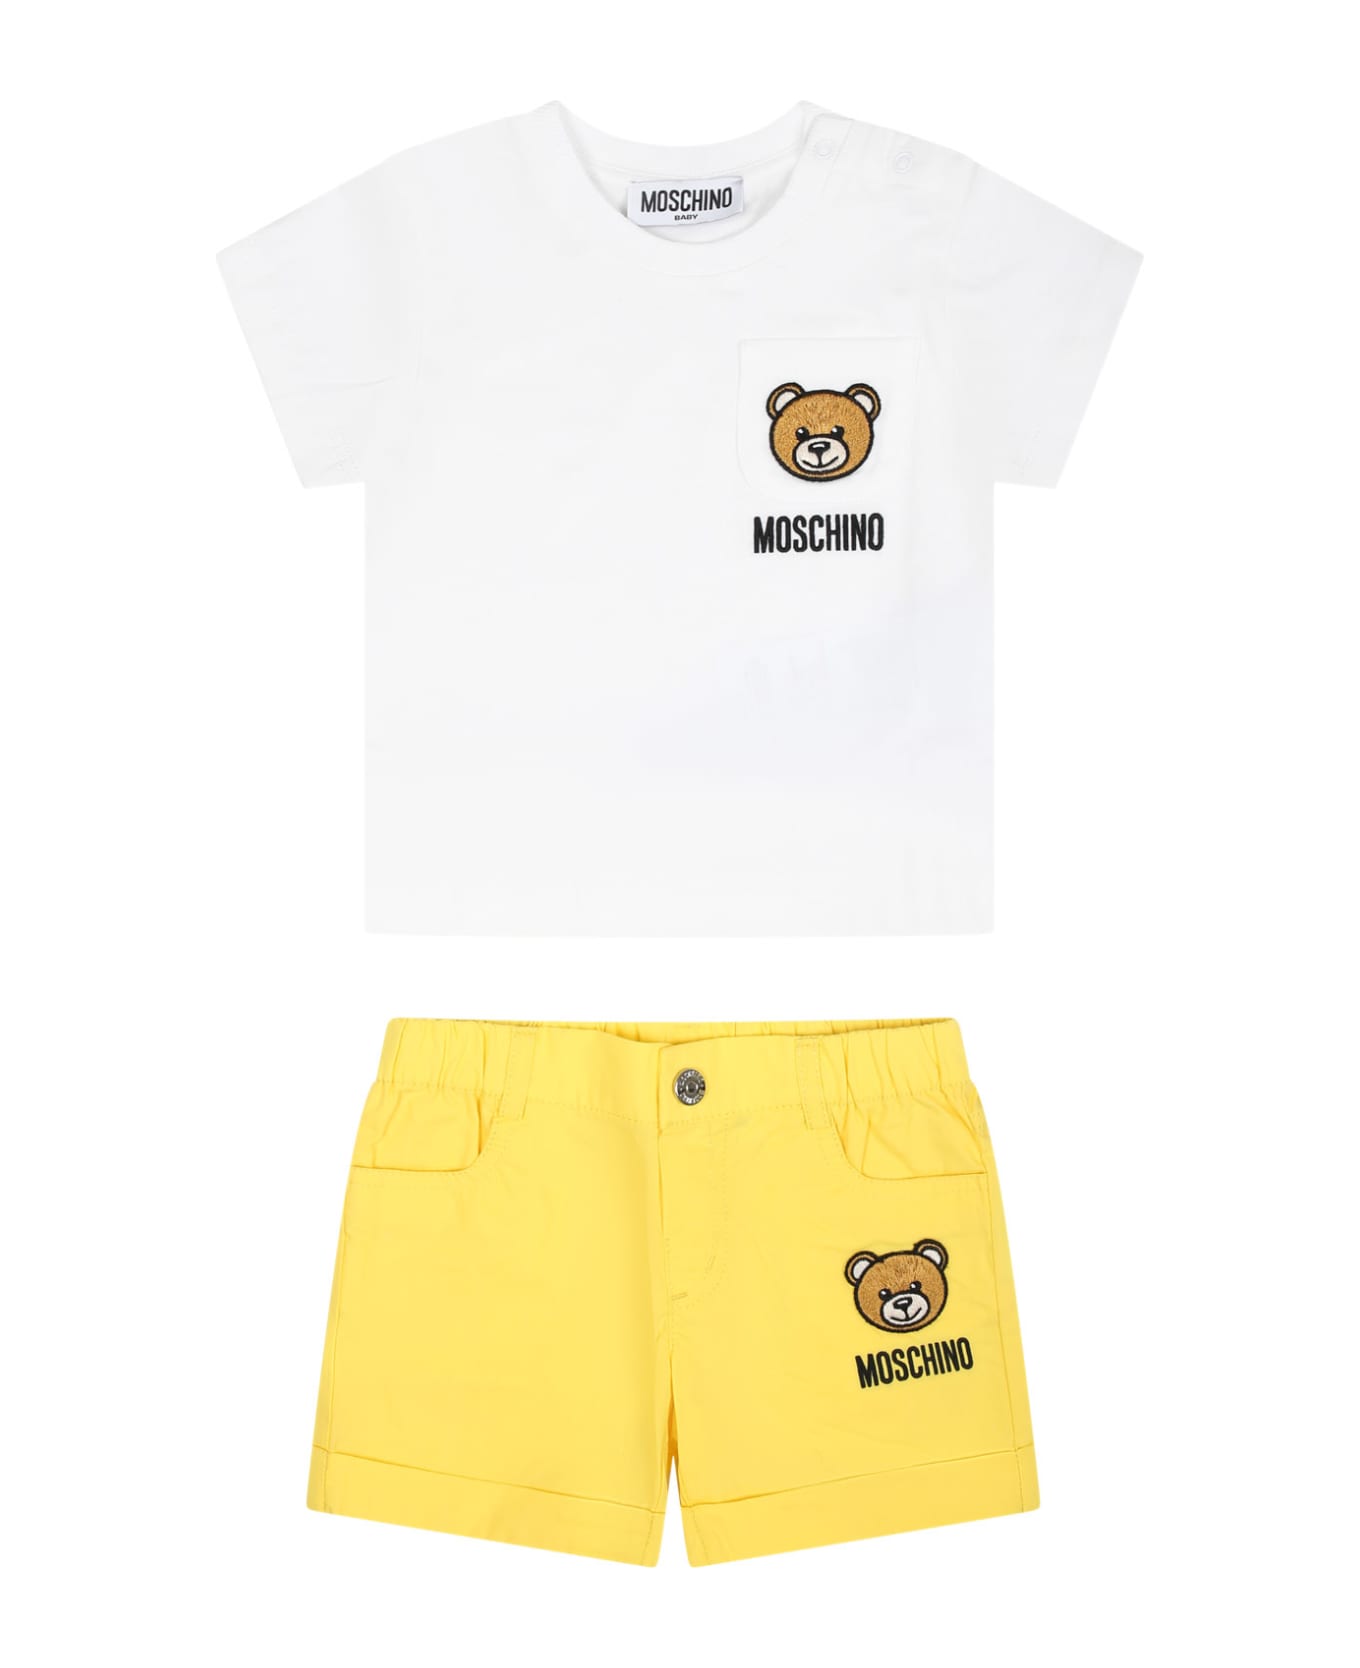 Moschino Multicolor Sports Suit For Baby Kids - YELLOW/WHITE